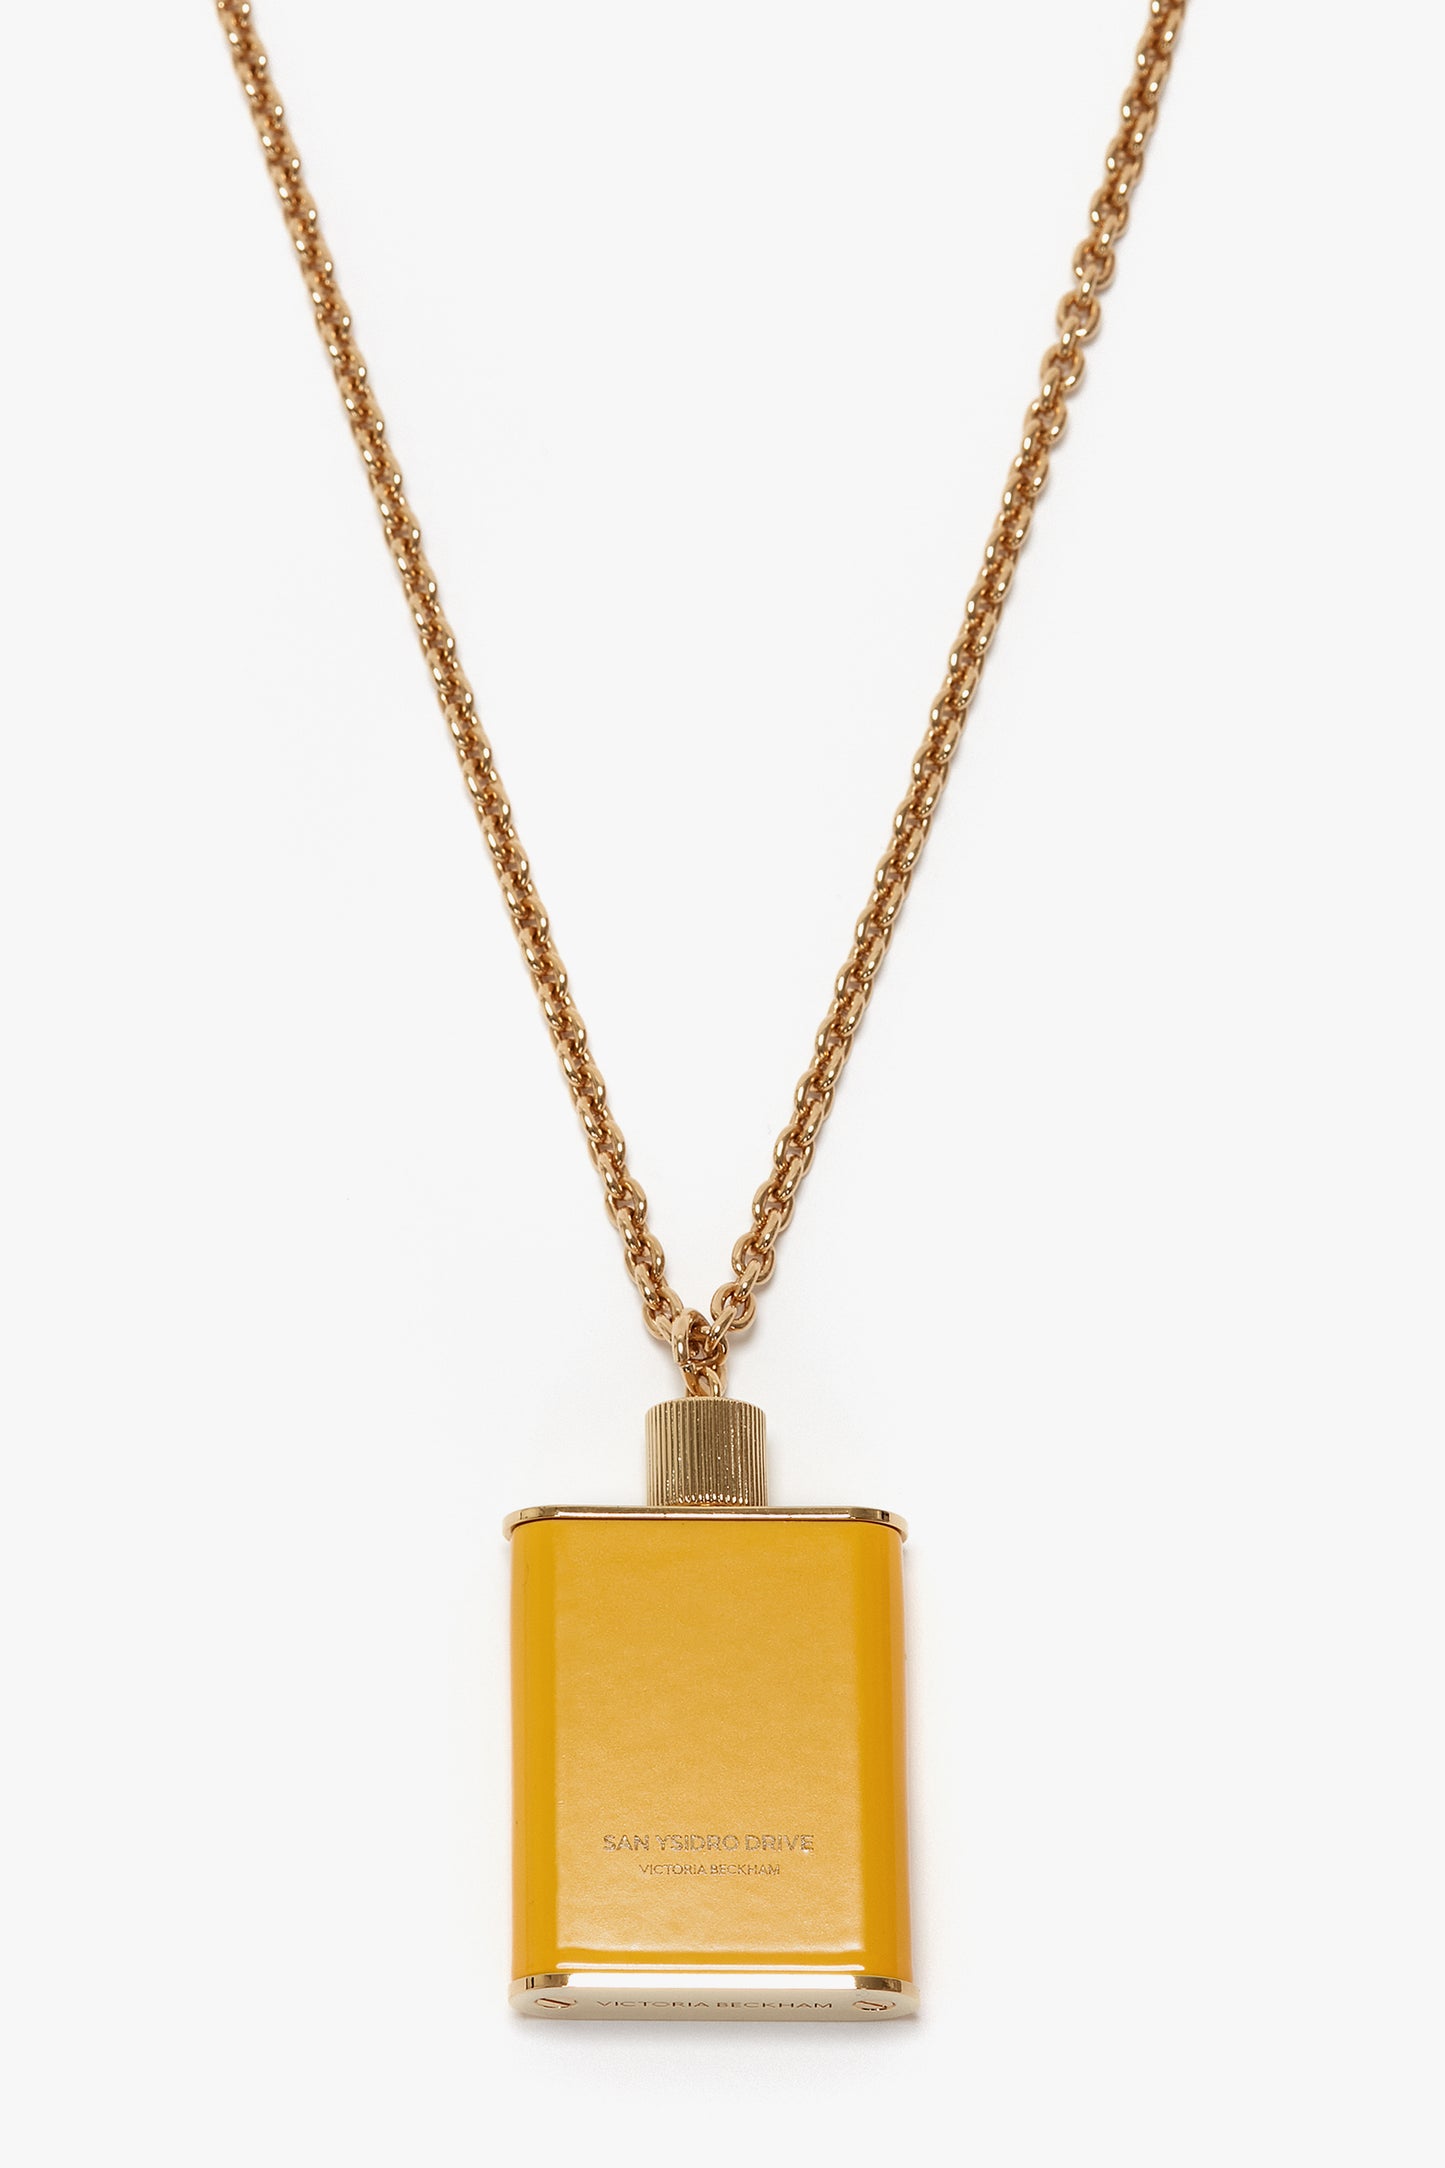 Perfume Bottle Necklace In San Ysidro Drive with a rectangular pendant designed to resemble a flask, featuring gold brushed brass finish and subtle Victoria Beckham branding.